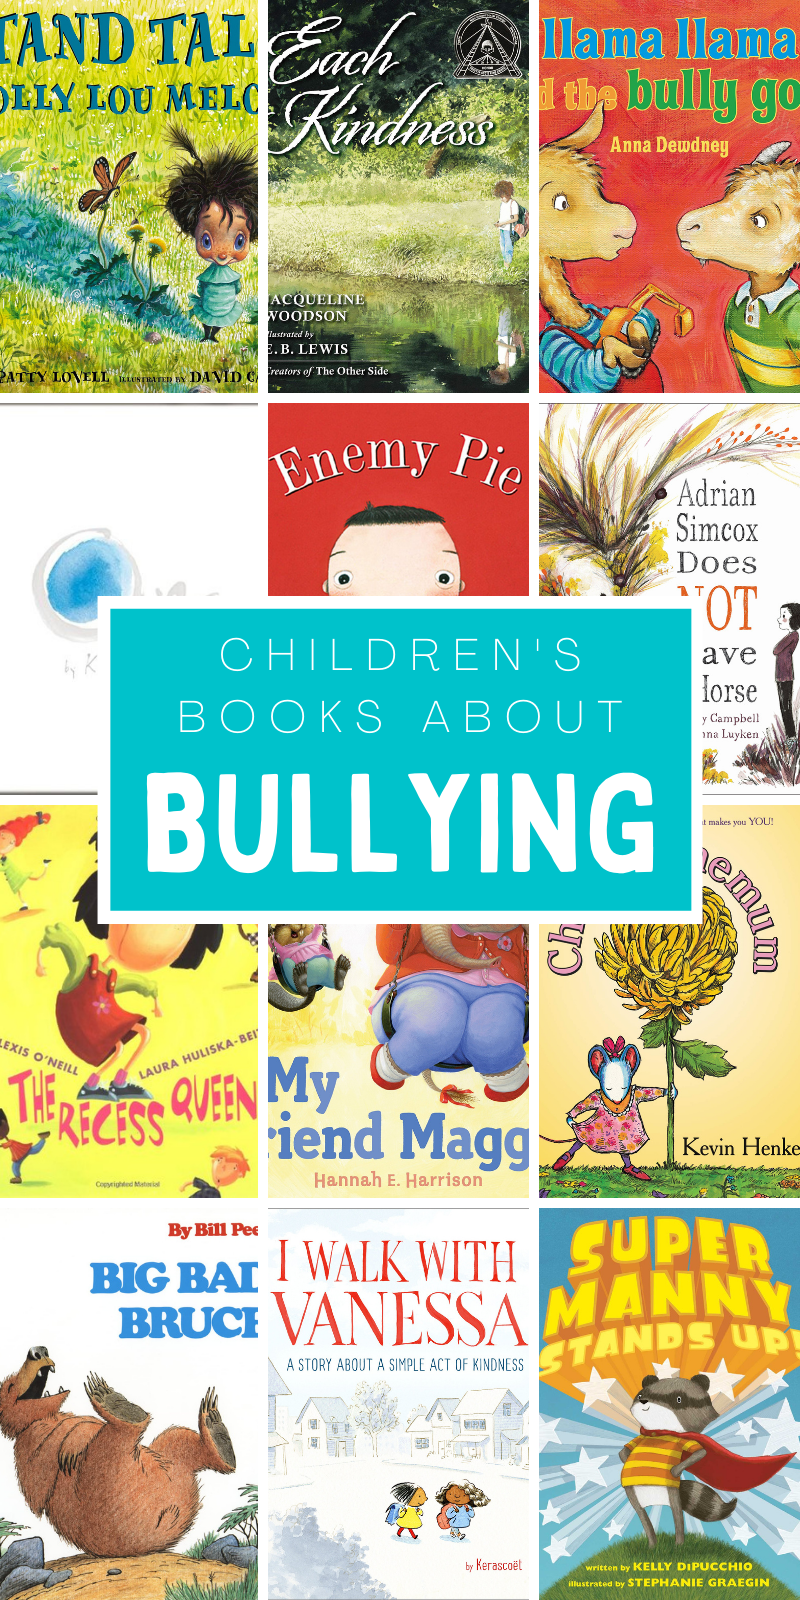 children's book abour bullying